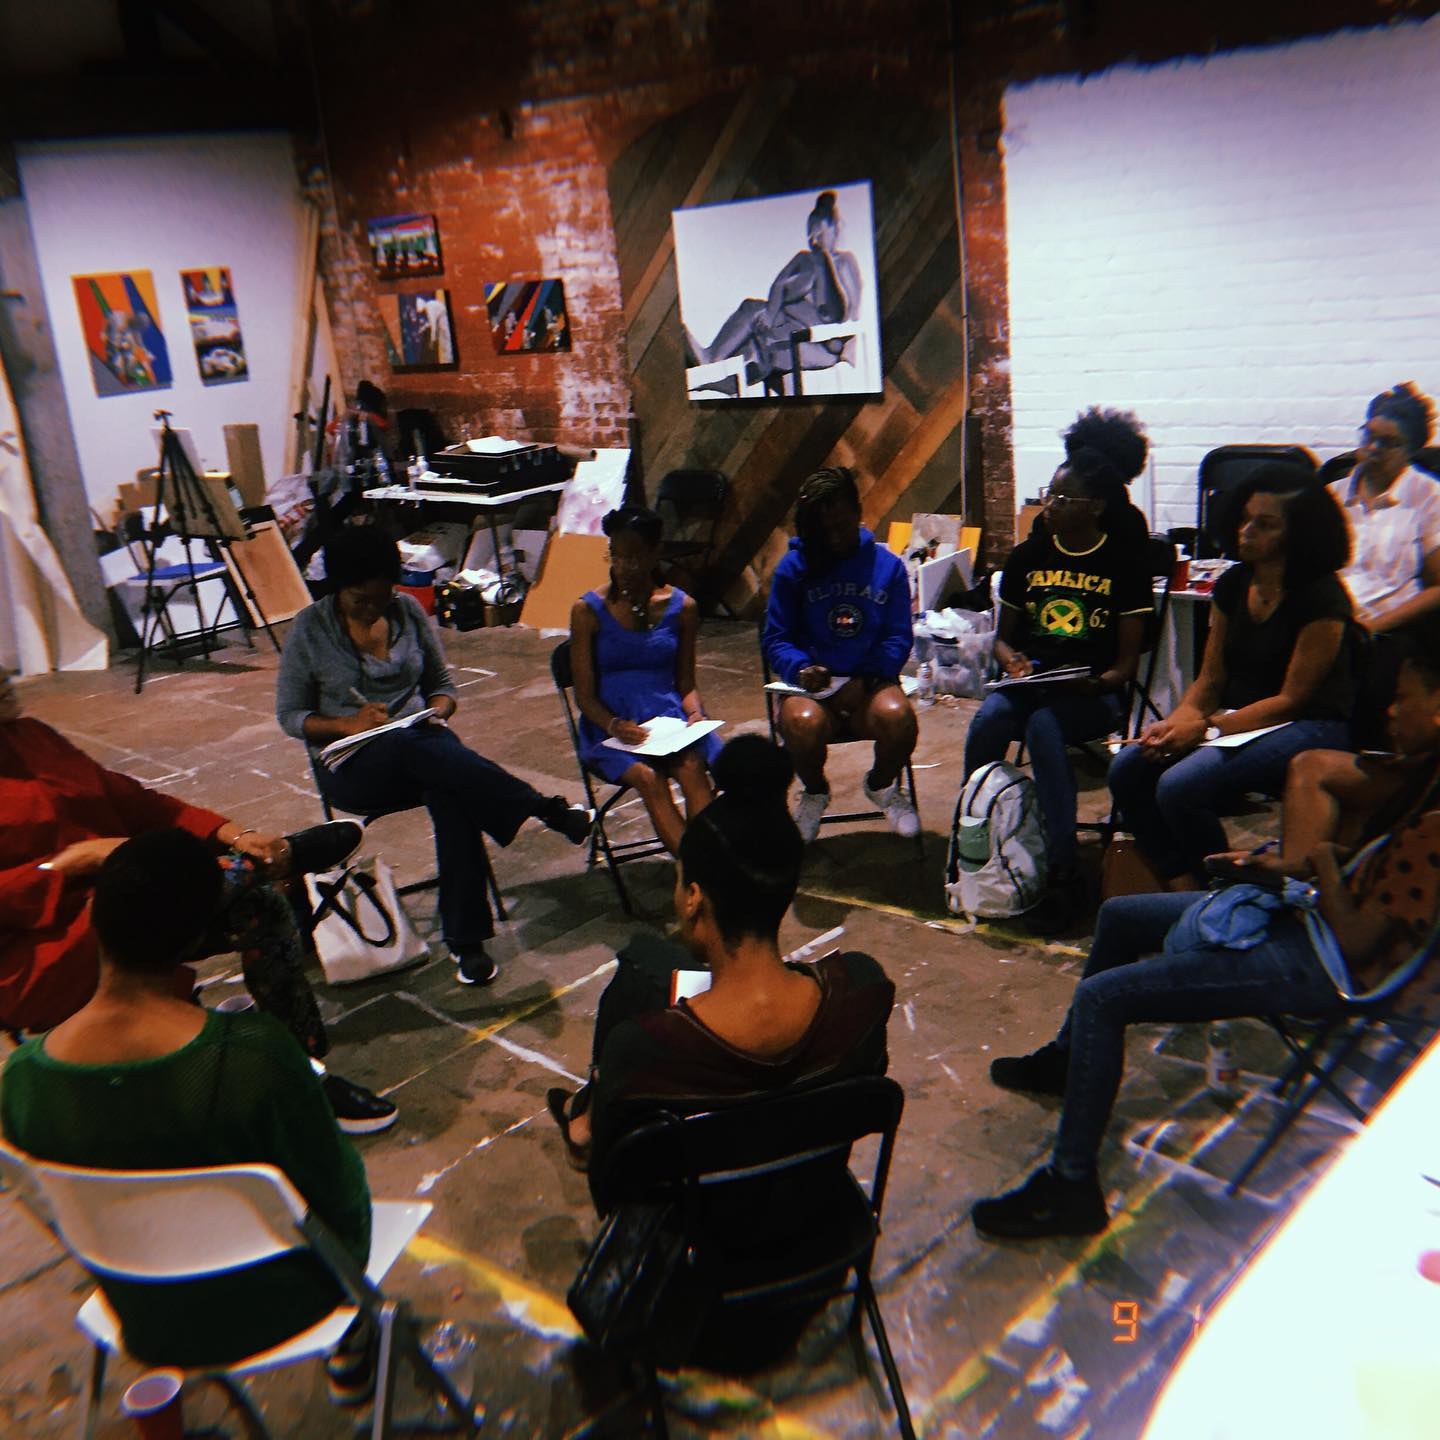 A photograph of around ten individuals sitting on folding chairs in a circle with notepads in their laps. There is art on the walls and a concrete floor.